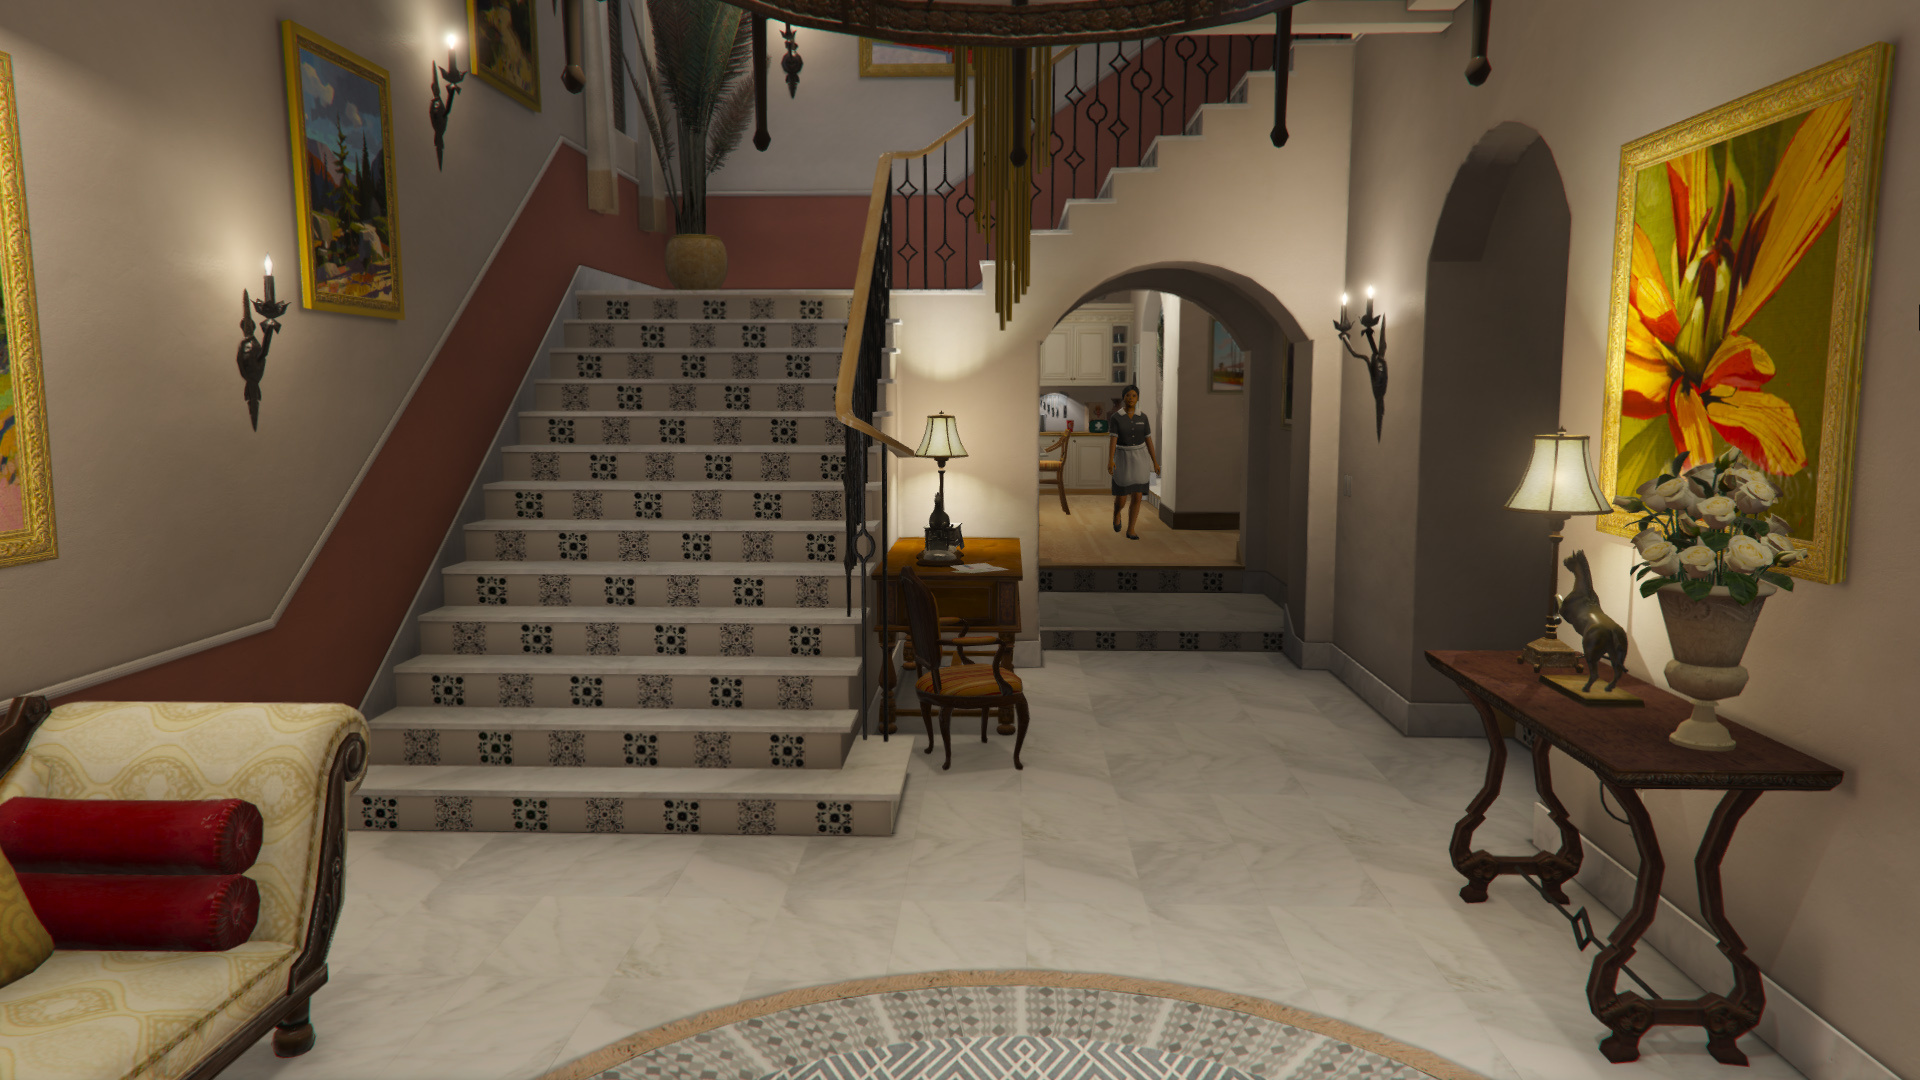 michaels house from gta 5 3d free blend download